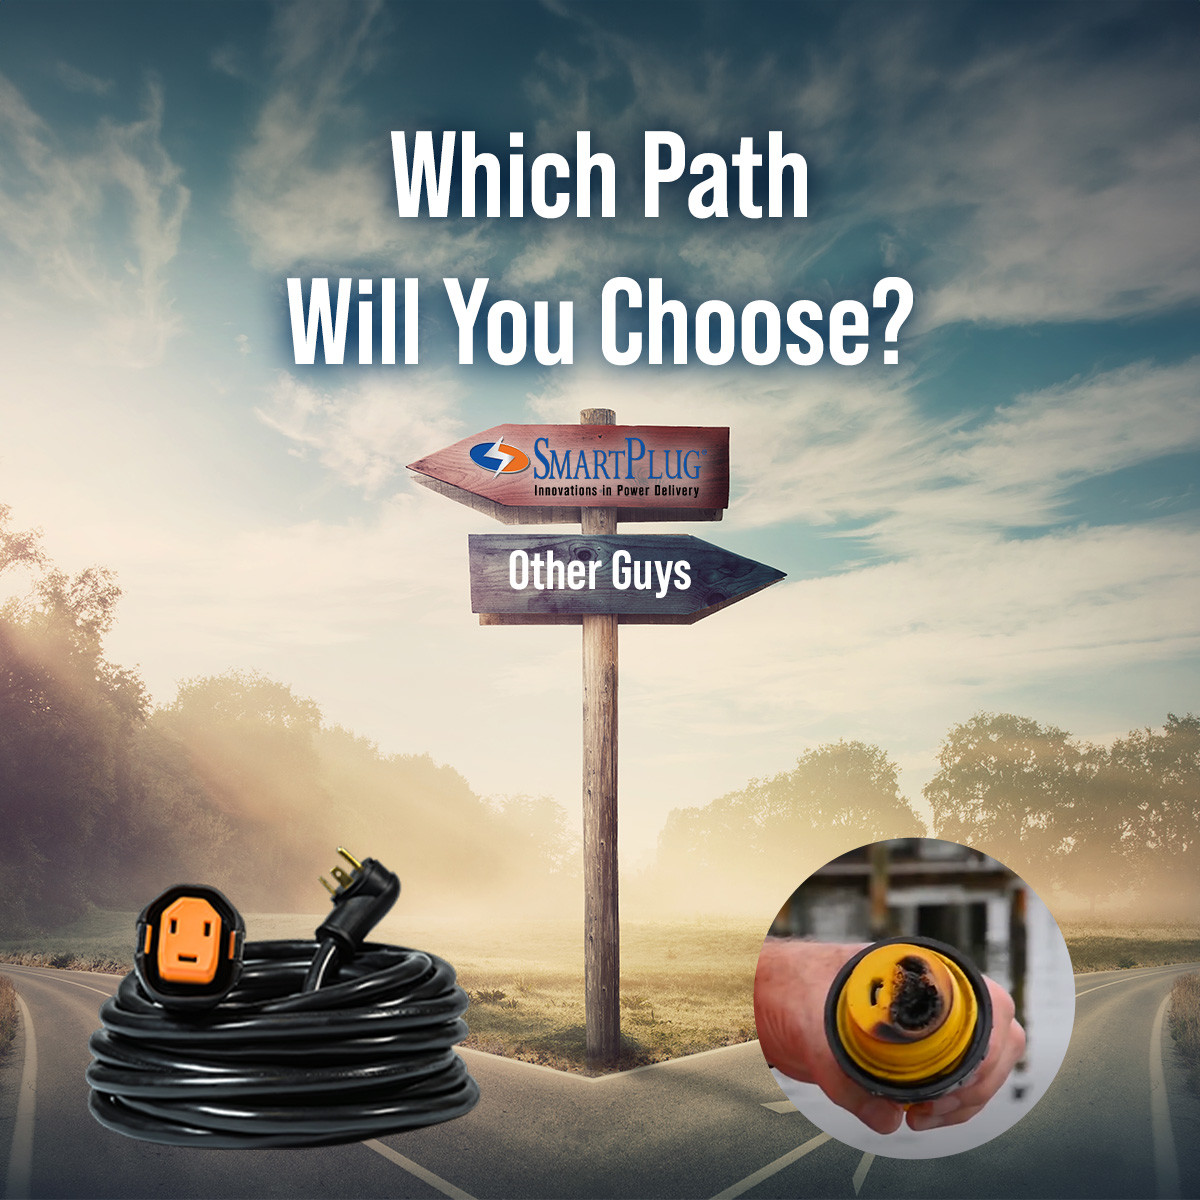 Which fork in the road will you choose? The choice is simple!🔌Our reliable RV cordsets provide a safer, more efficient power delivery system for your next road trip. 🚍 

For a hassle-free RV adventure, consider upgrading to #SmartPlug!

#RVSafety #RVAccessories